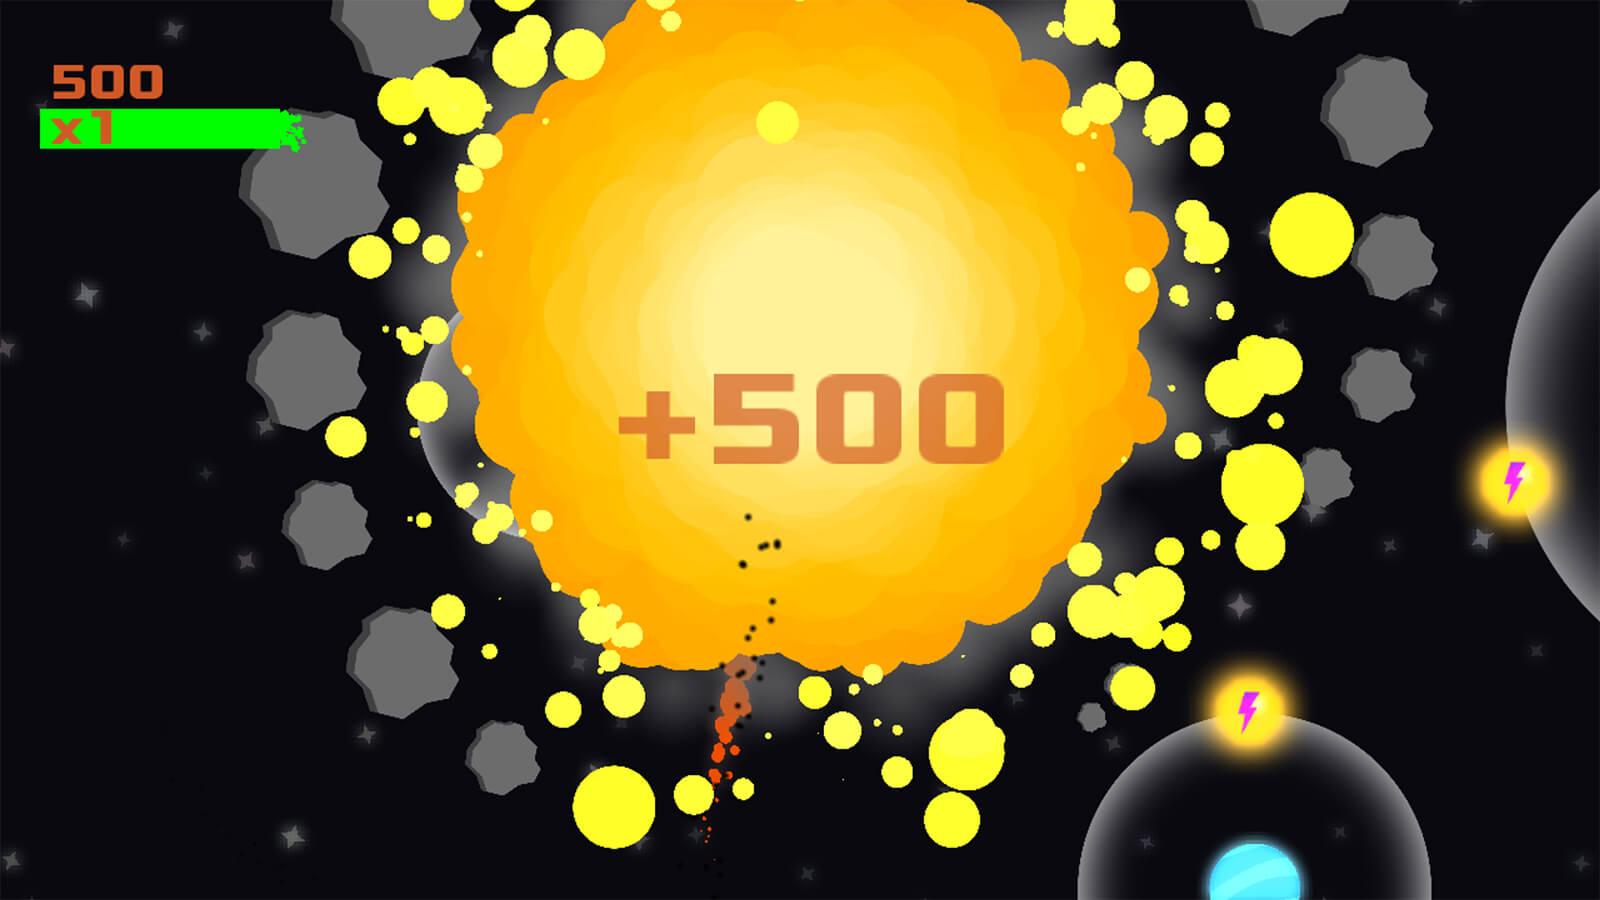 A giant orange explosion erupts with a "+500" point counter.